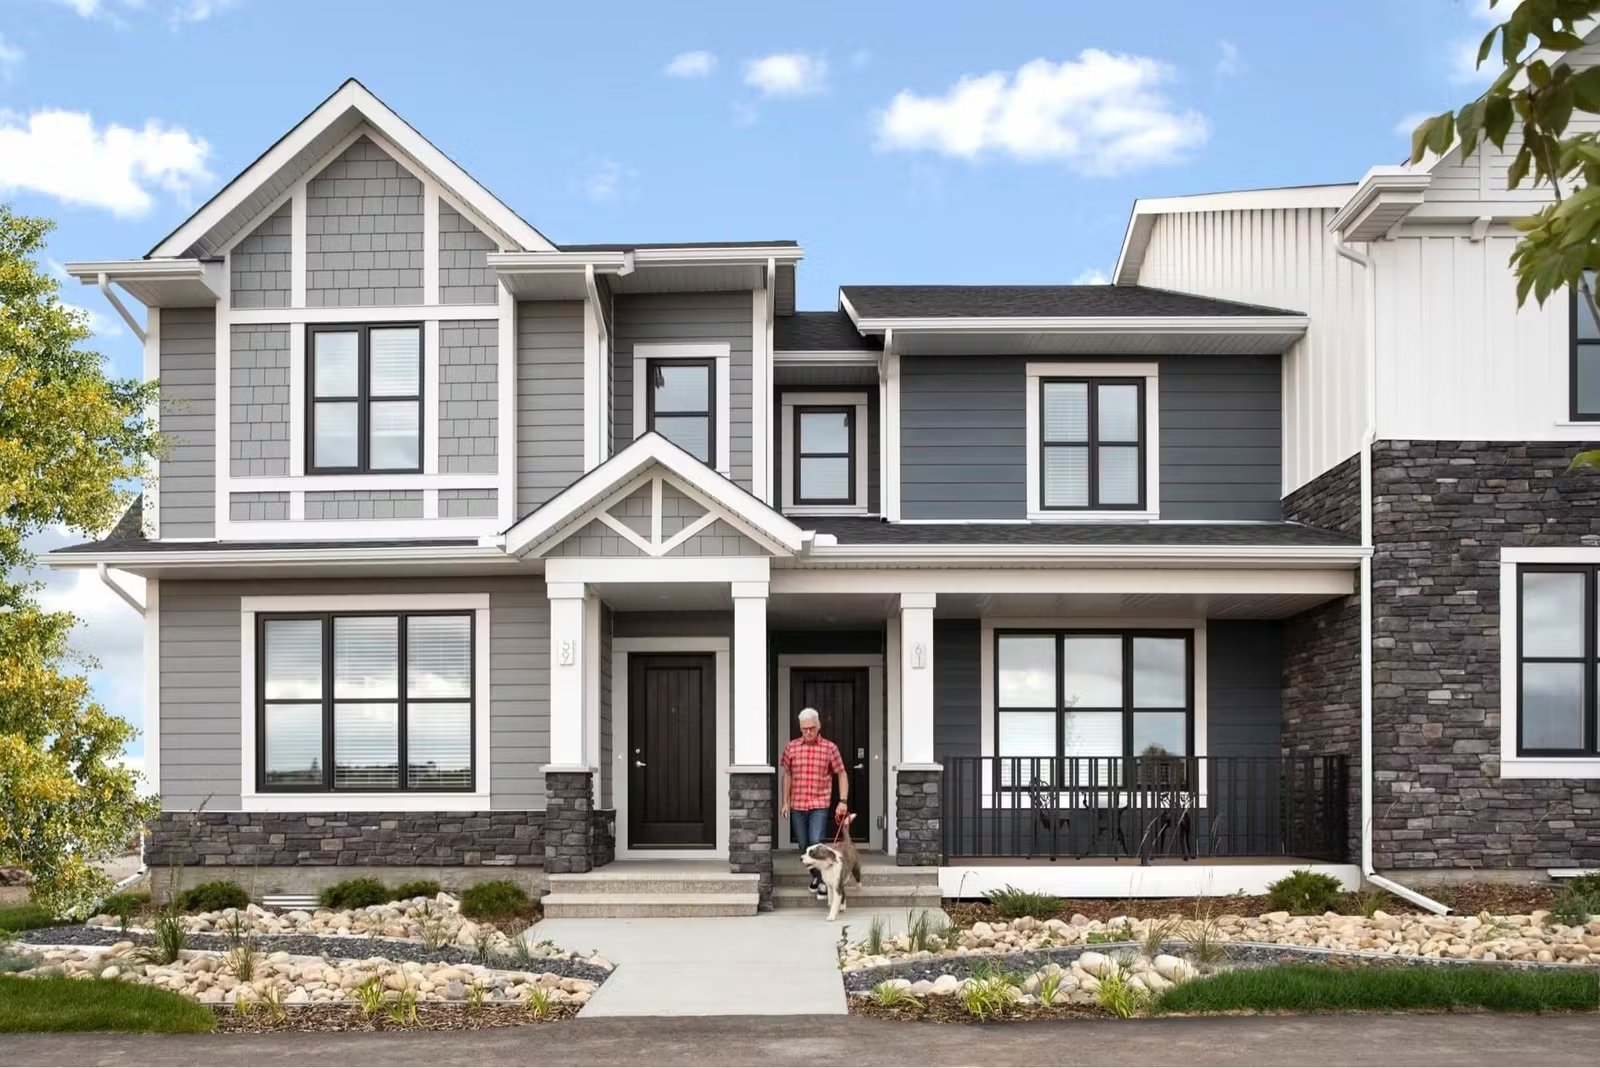 Sirocco Street Towns Calgary townhomes for sale in Pine Creek, SW Calgary